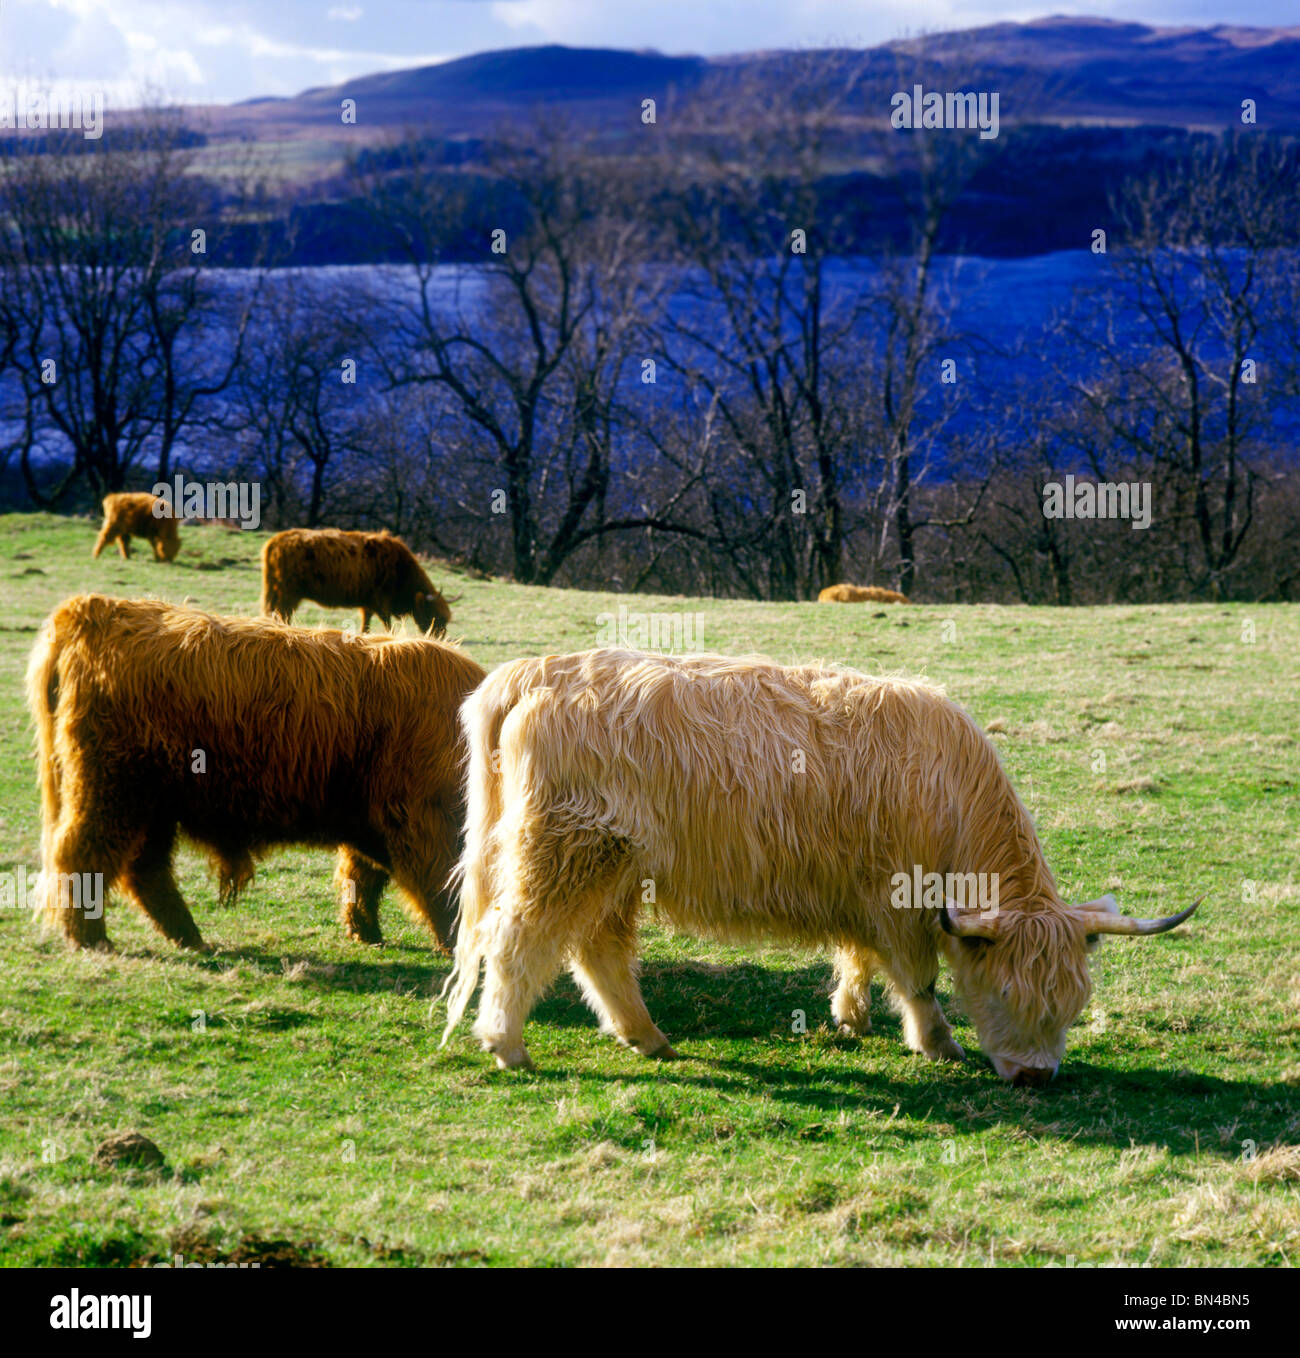 Long haired Highland cattle Loch Awe Scotland Stock Photo